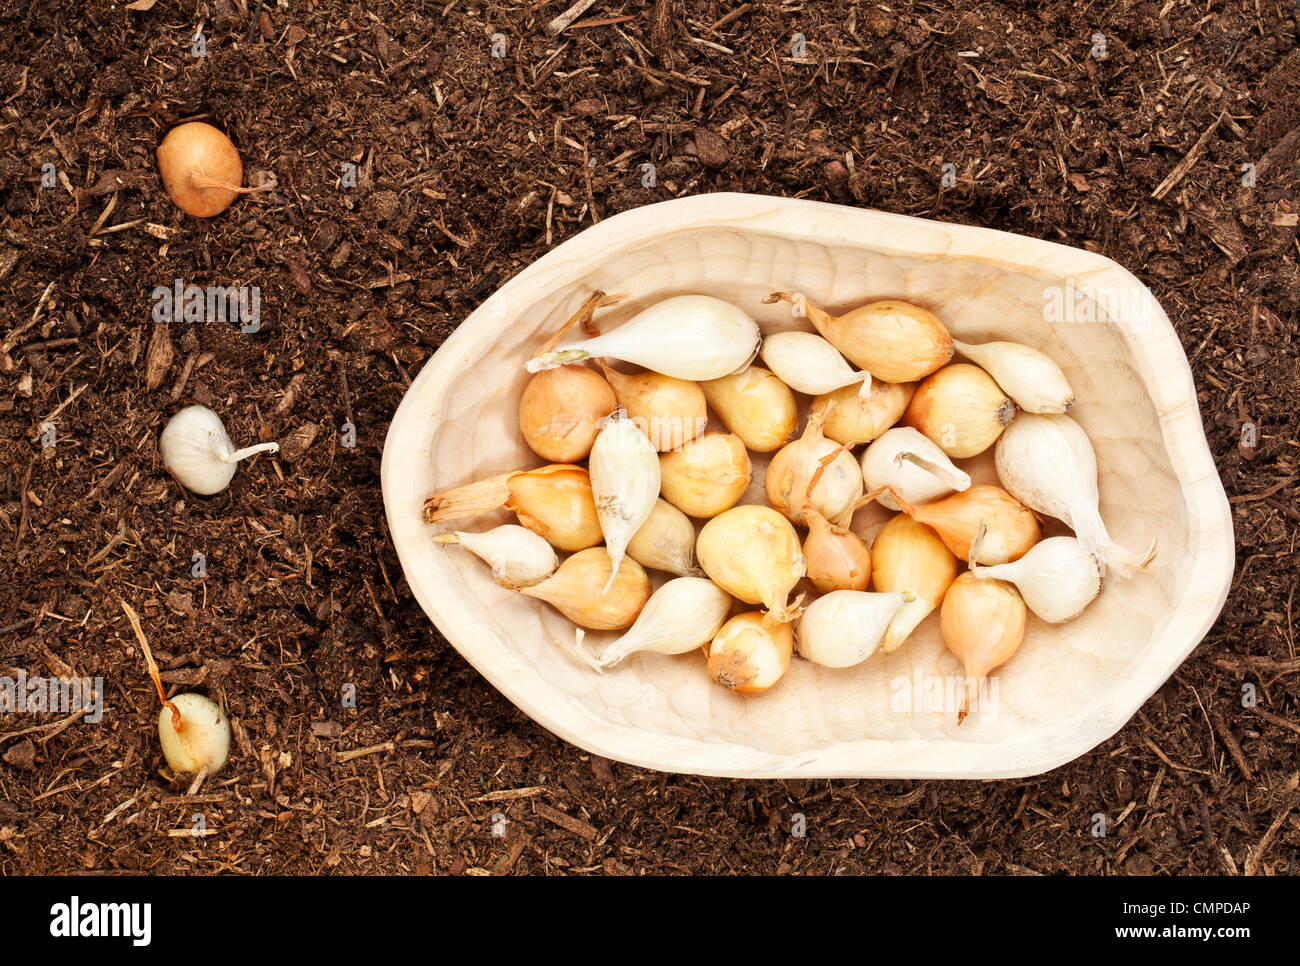 yellow and white onion for planting - small bulbs in a rustic wood bowl and some planted in garden soil Stock Photo